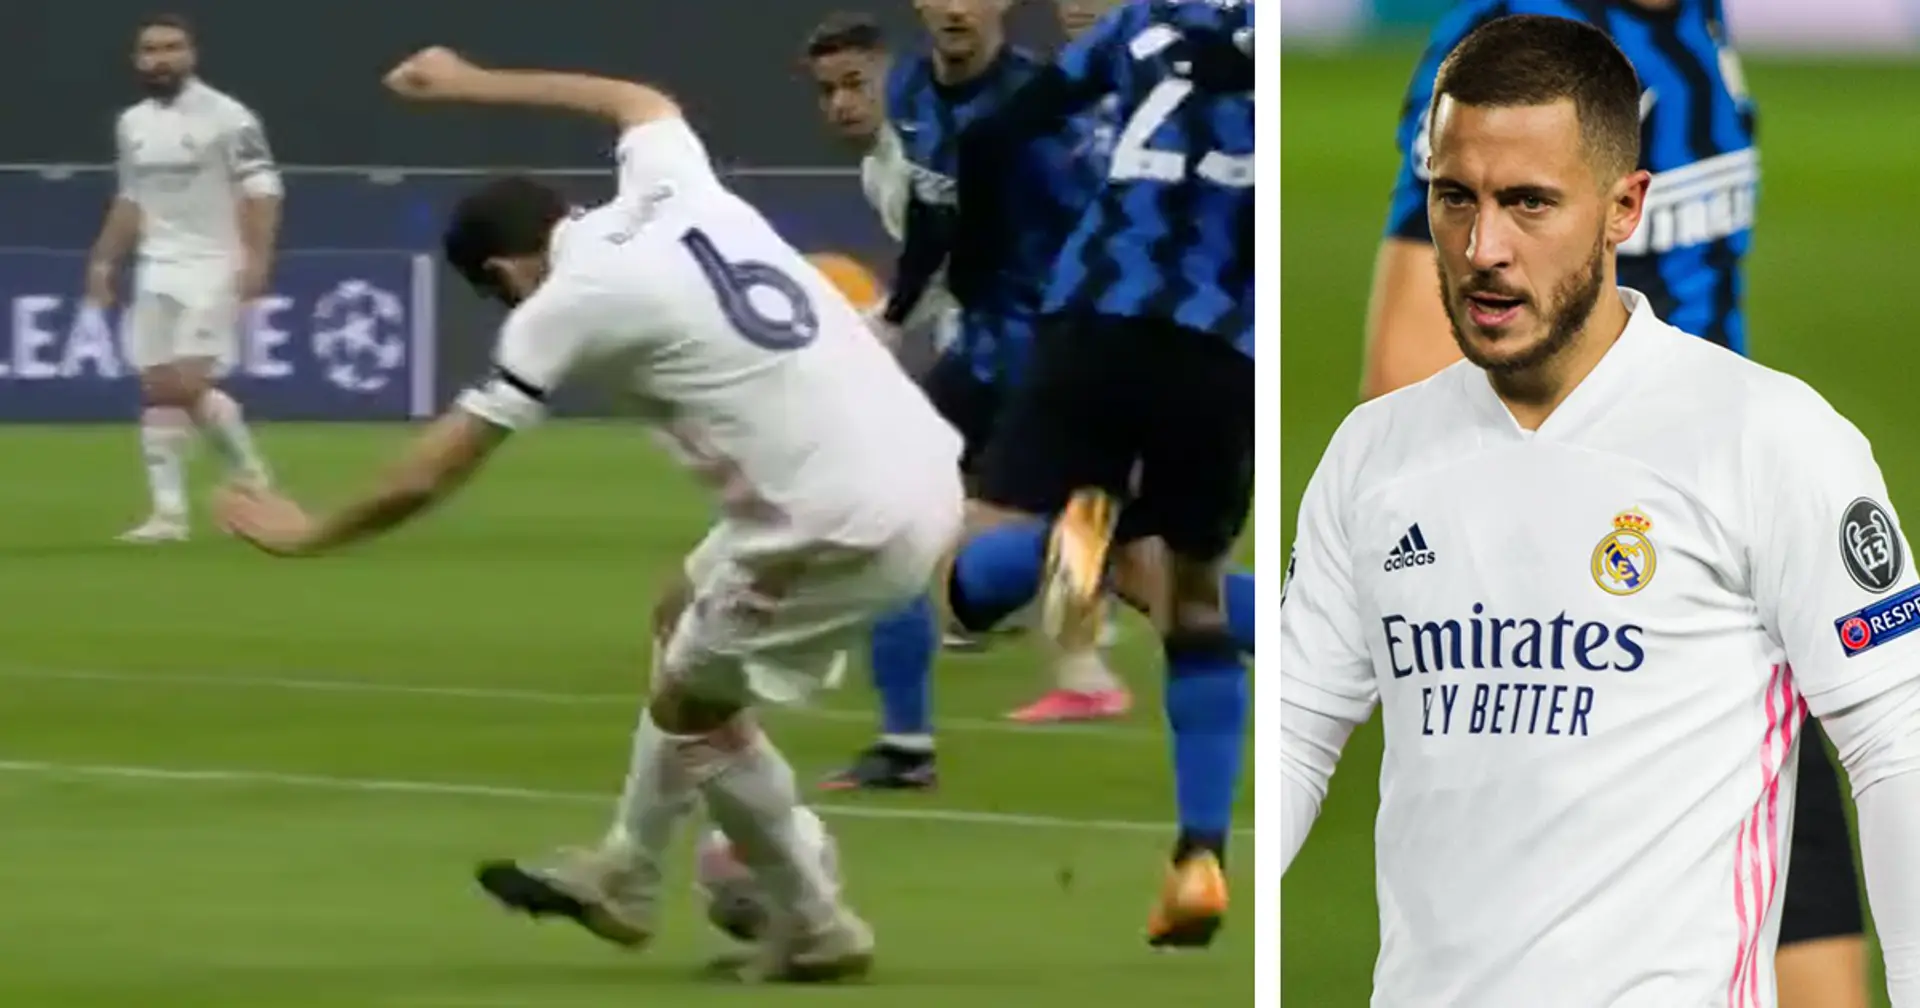 'I thought Mariano was our striker. I was wrong': All hail Nacho for winning penalty vs Inter Milan